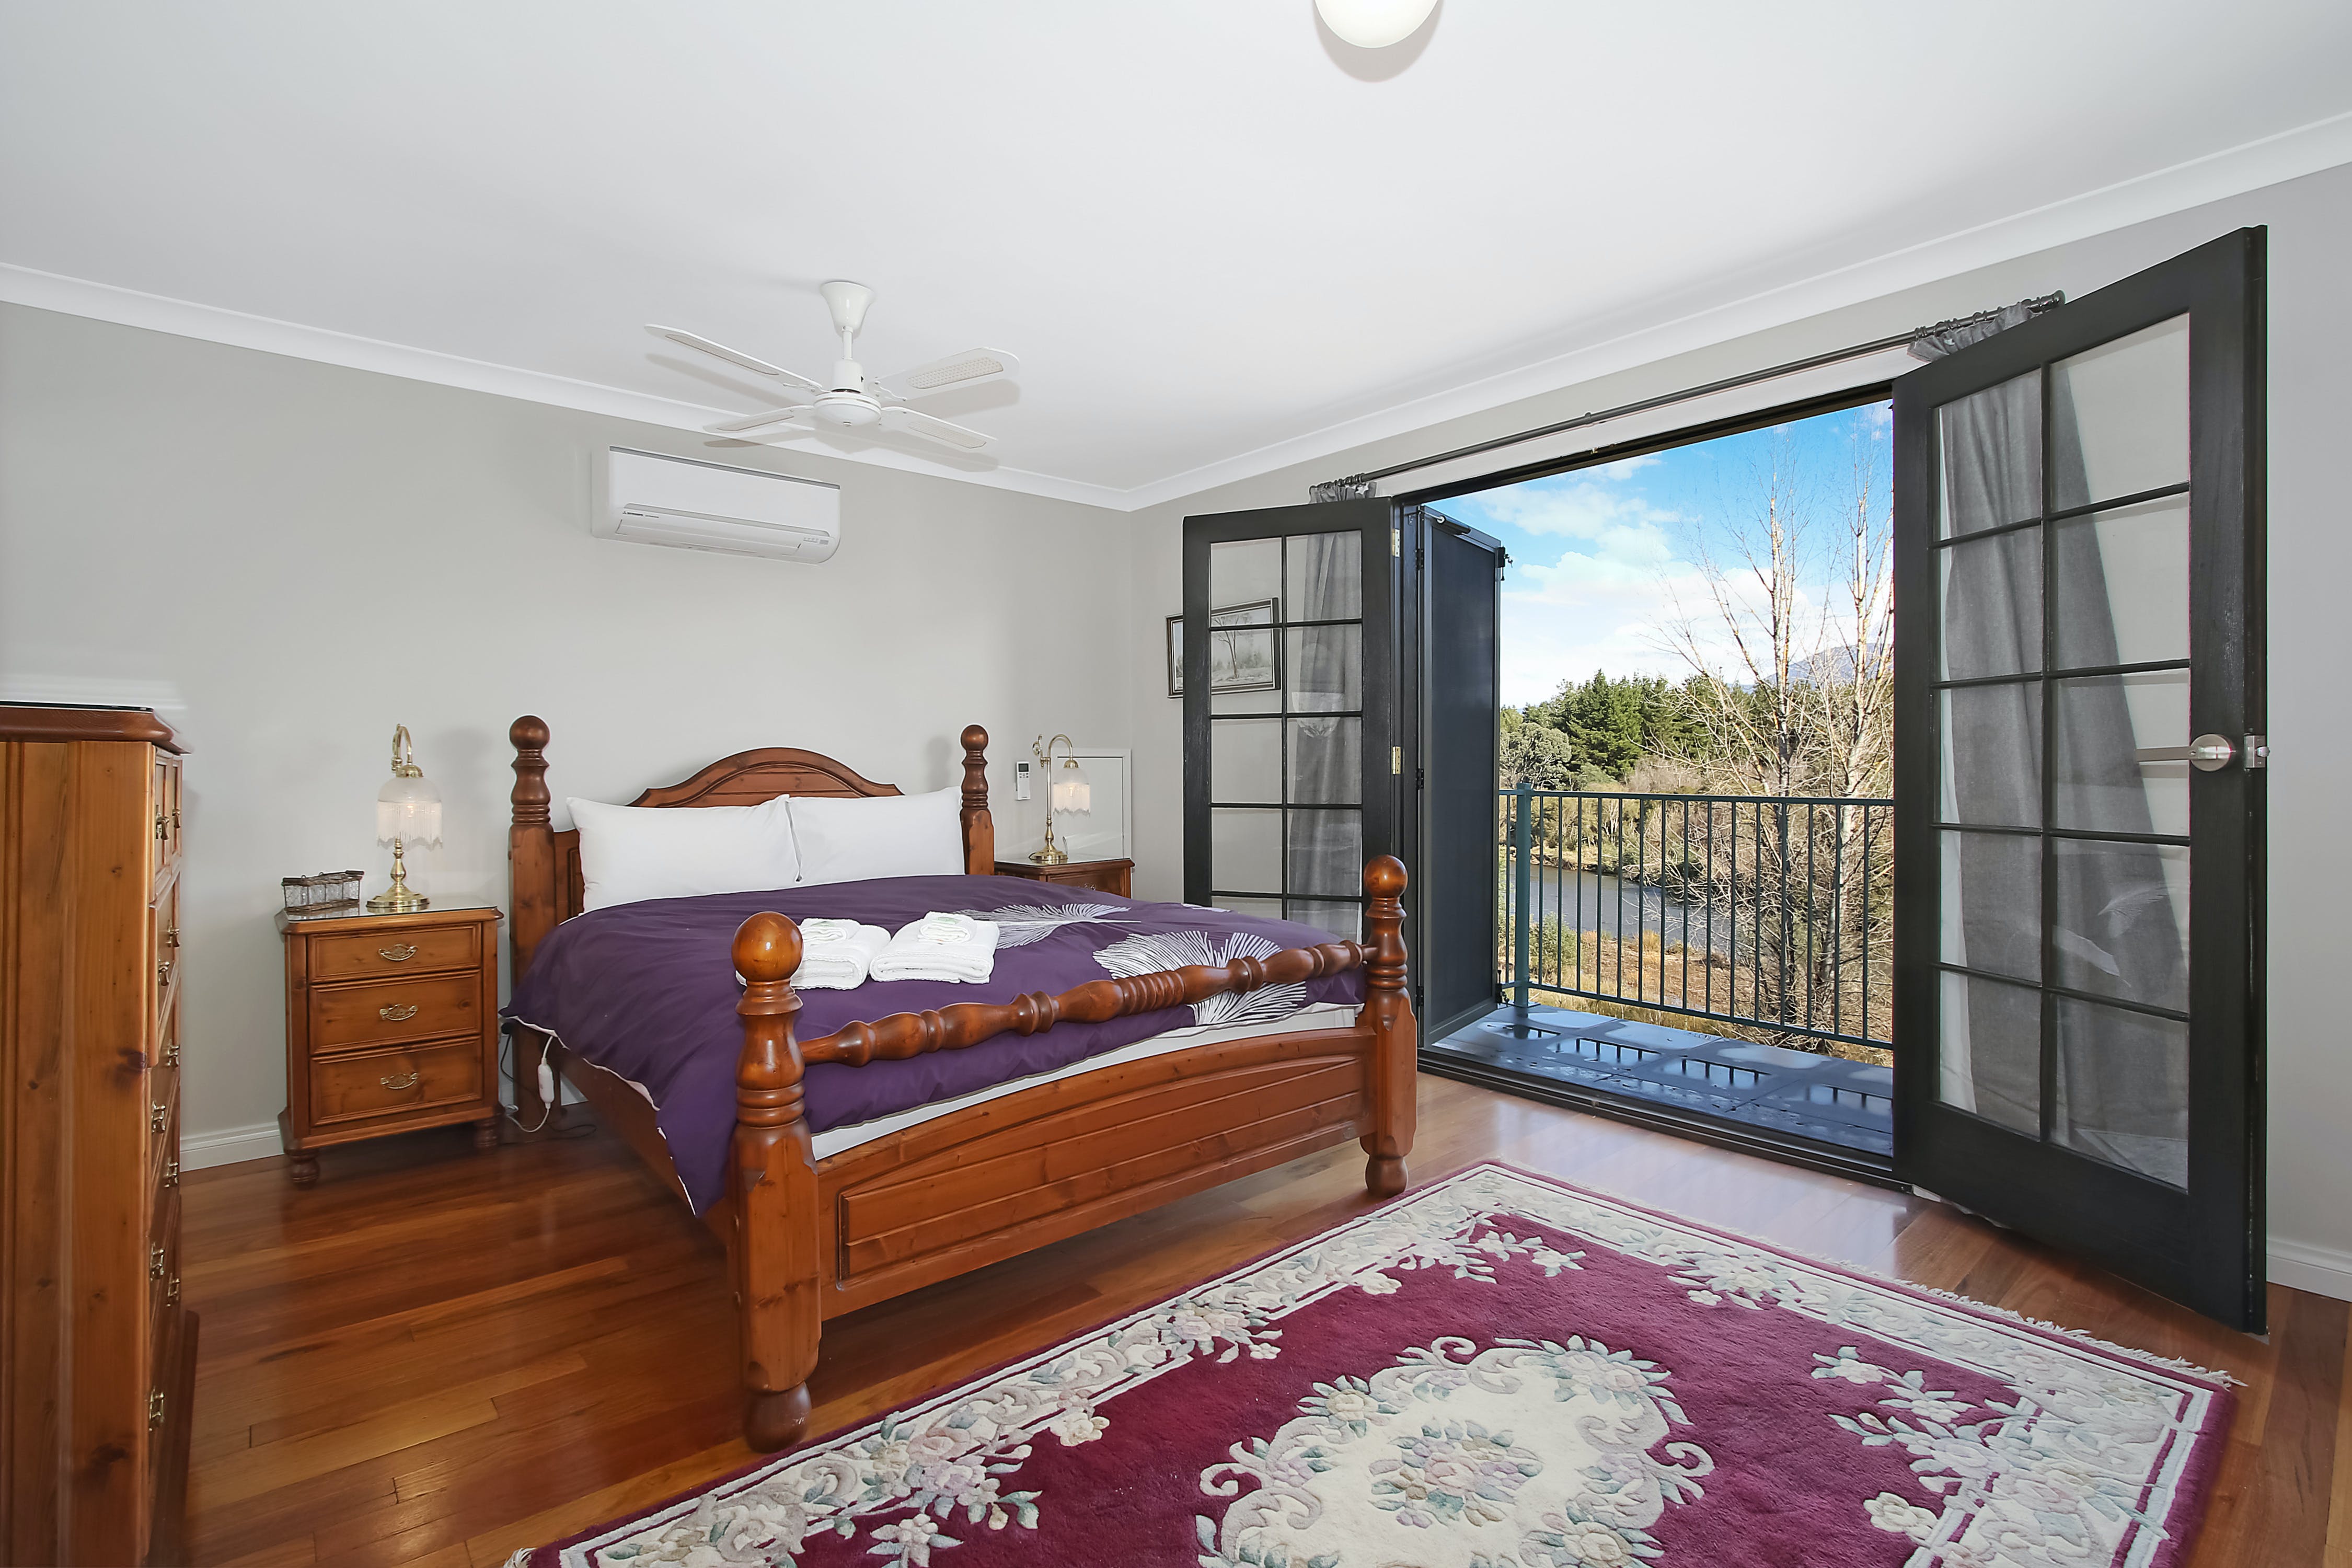 River Verse - Coogee Beach Accommodation